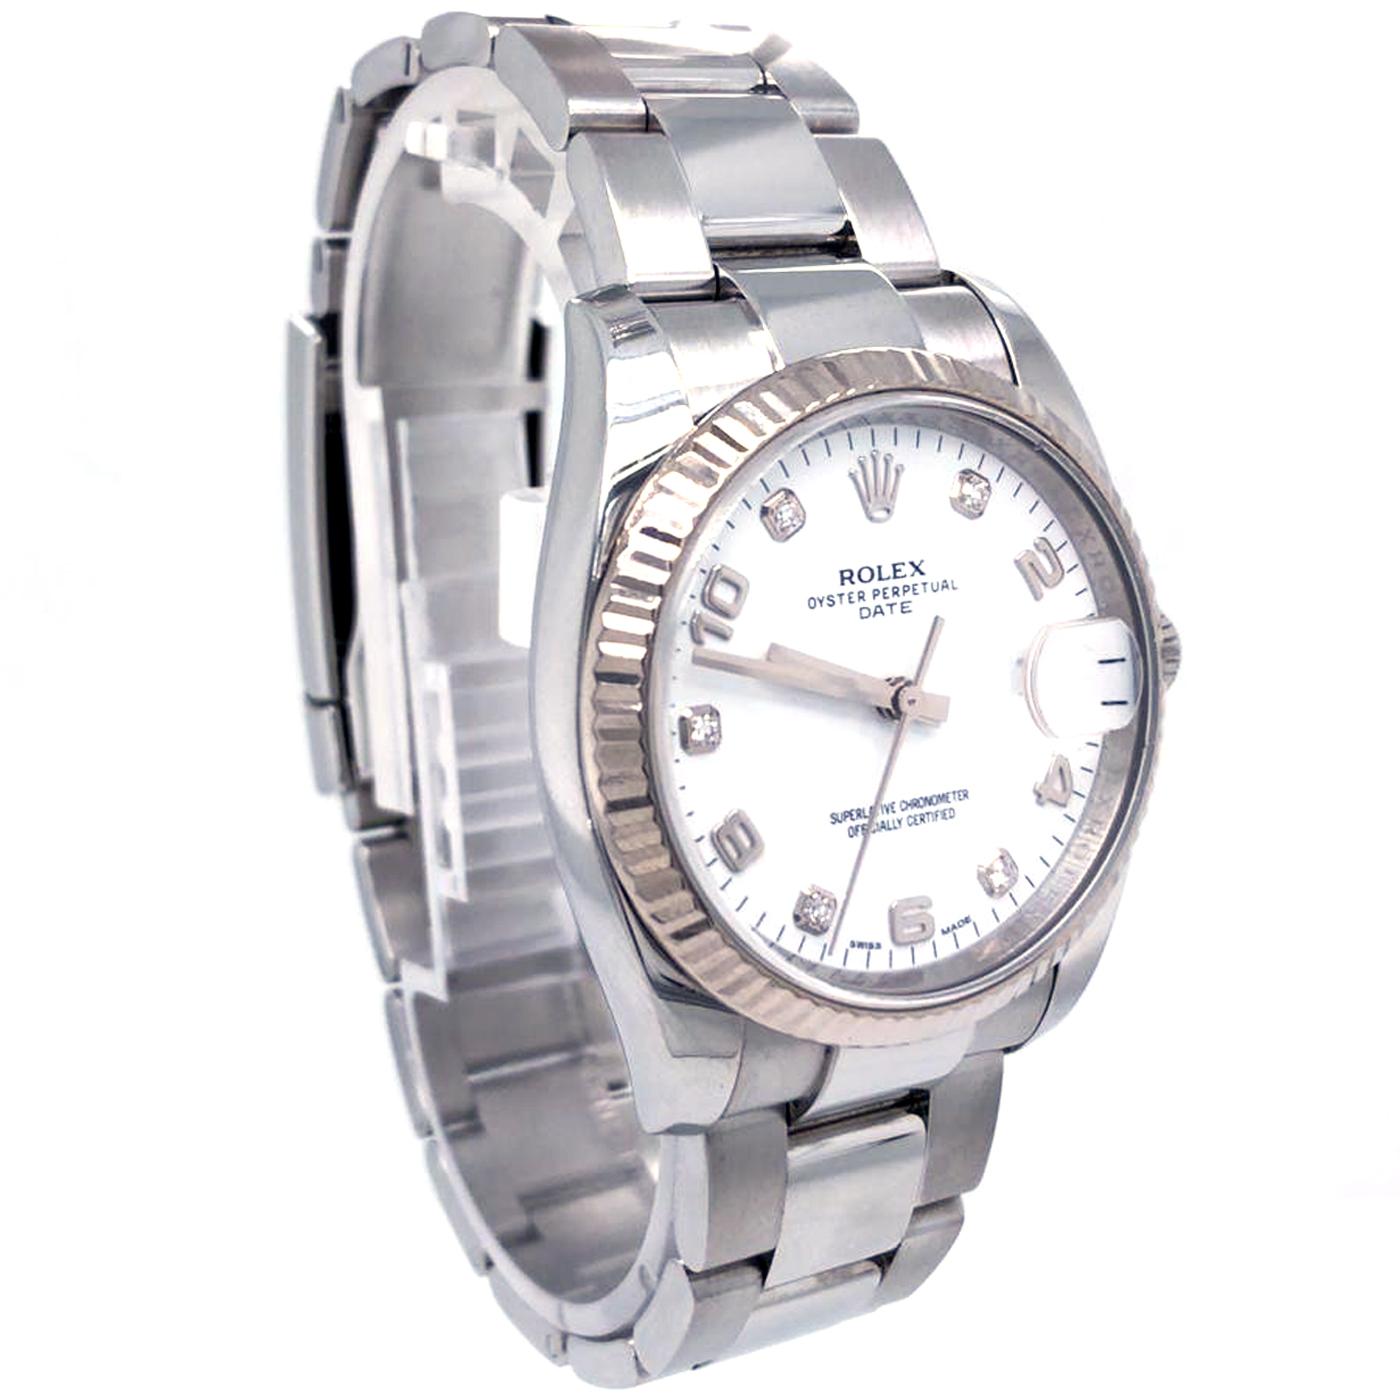 Modernist Rolex Oyster Perpetual Date 34 Stainless Steel 18k White Gold Oyster-Band 115234 For Sale